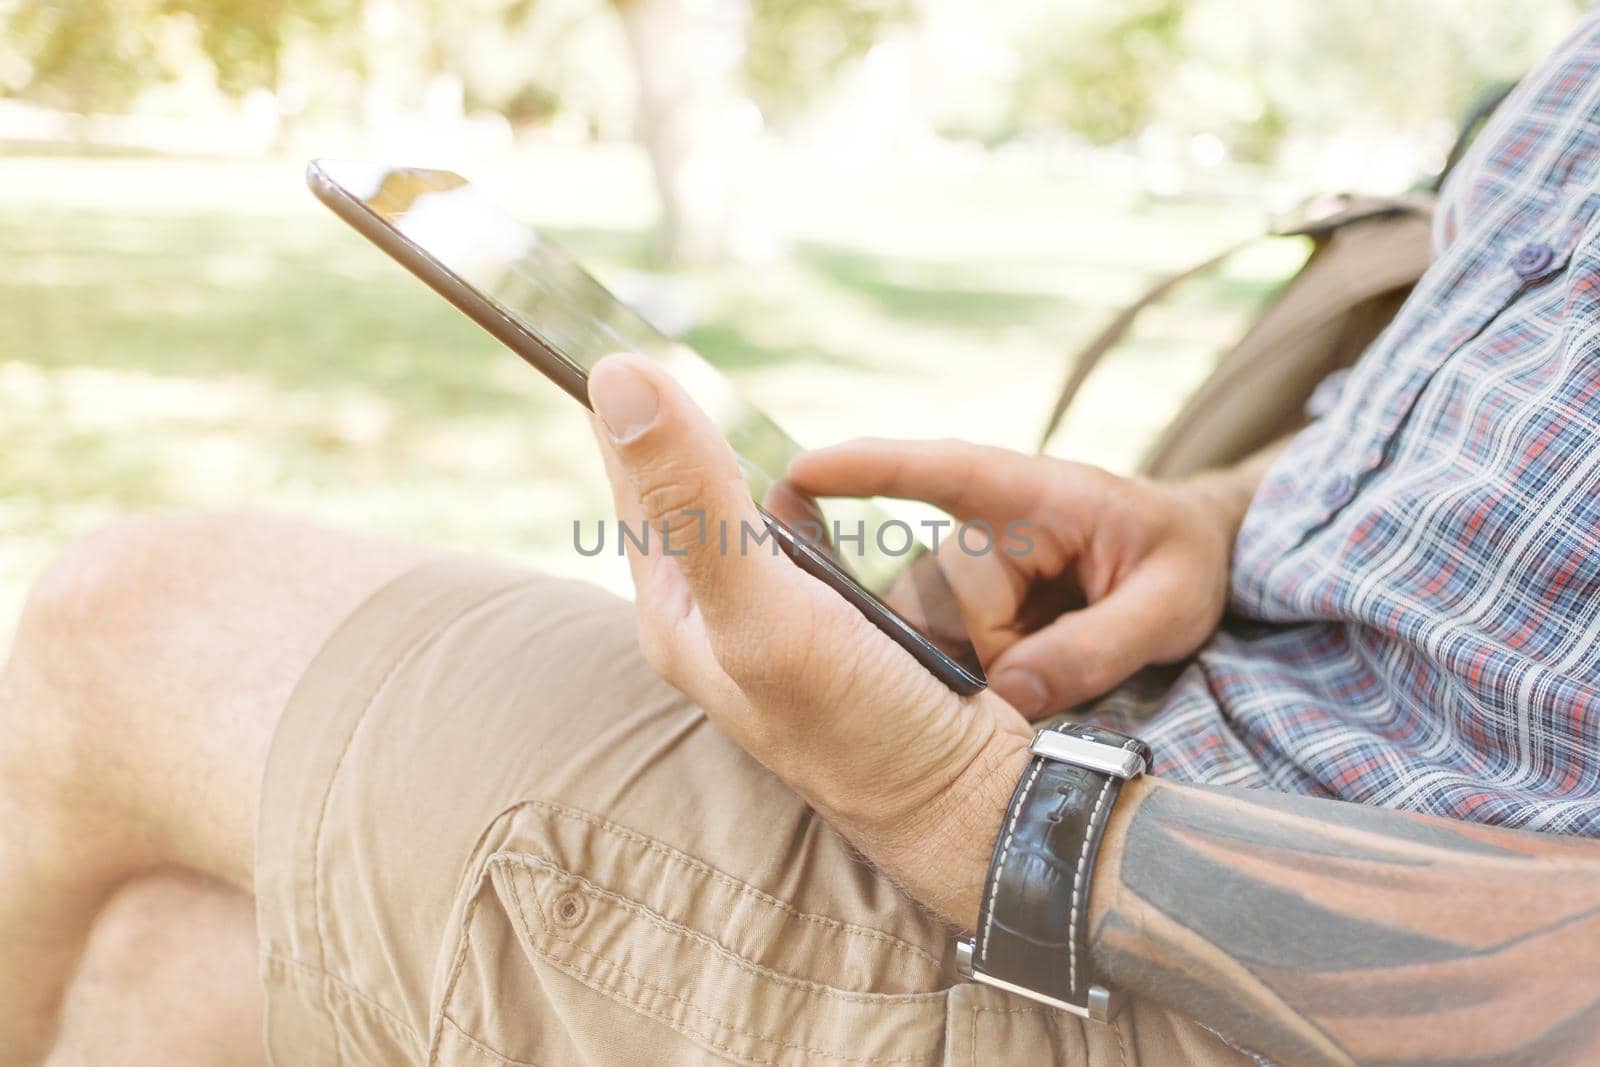 Young man using digital tablet in summer park, close-up of hands.